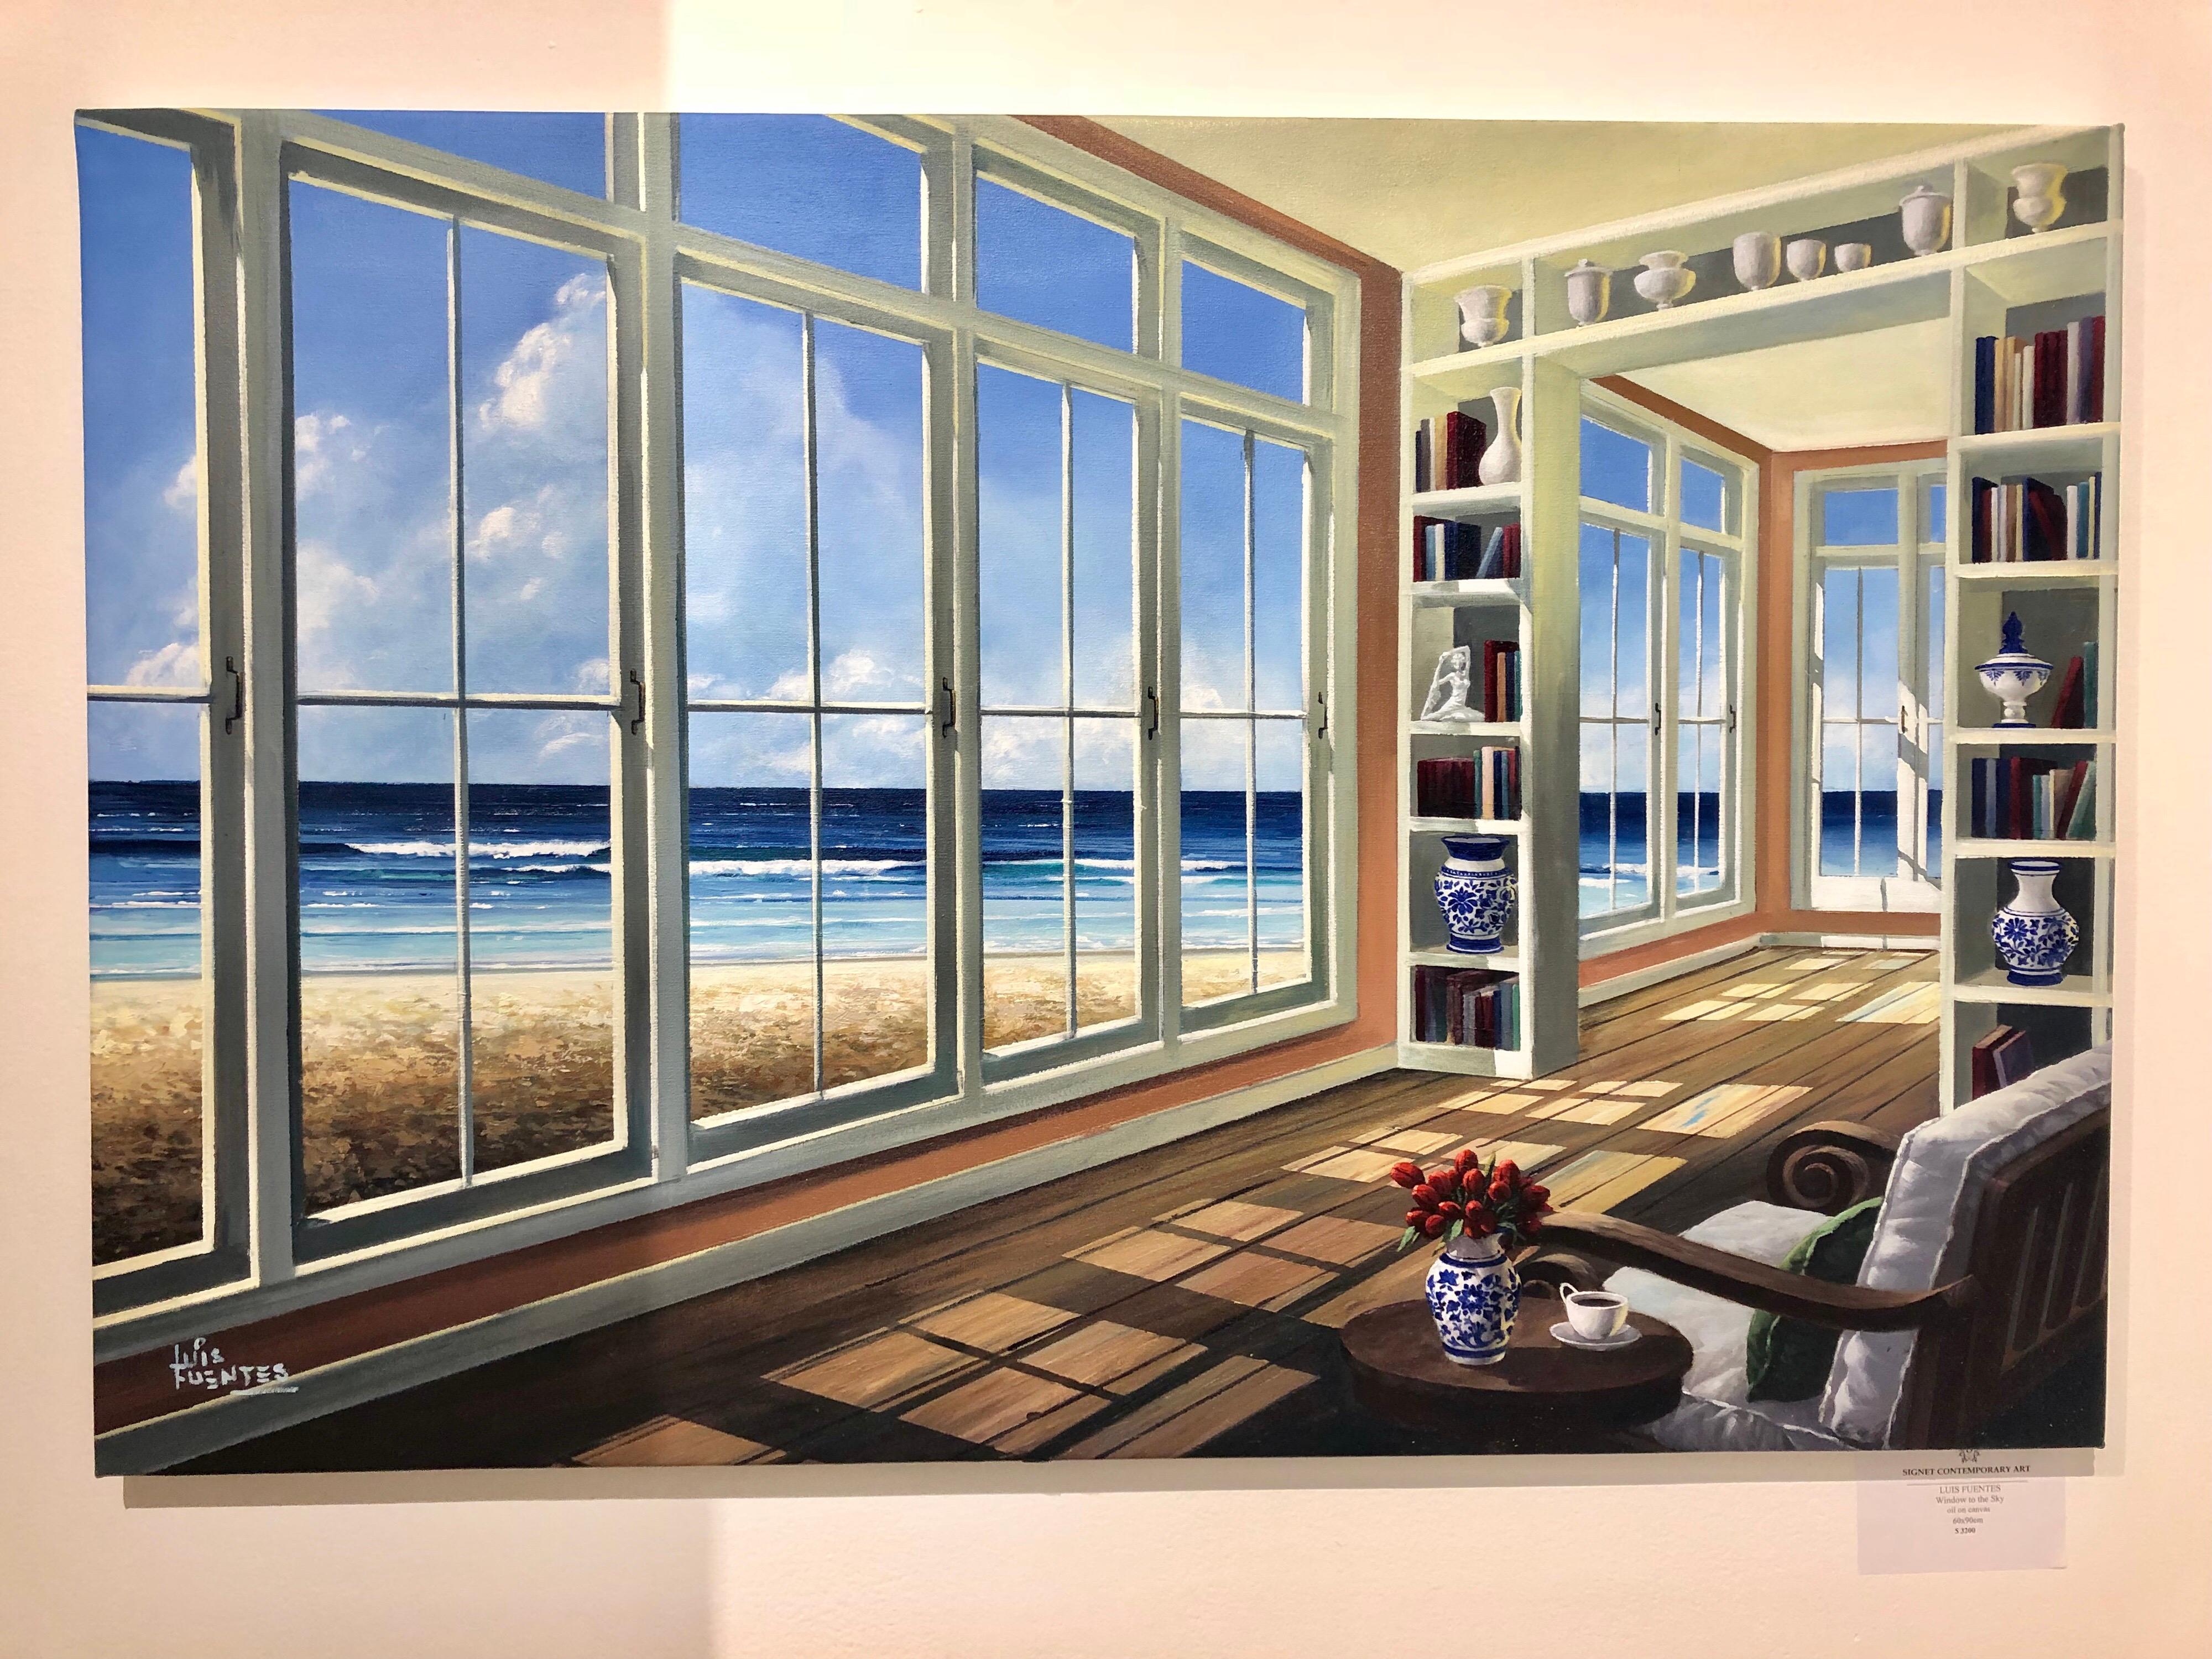 Windows to the sky   original Sea Landscape painting - Painting by Luis Fuentes